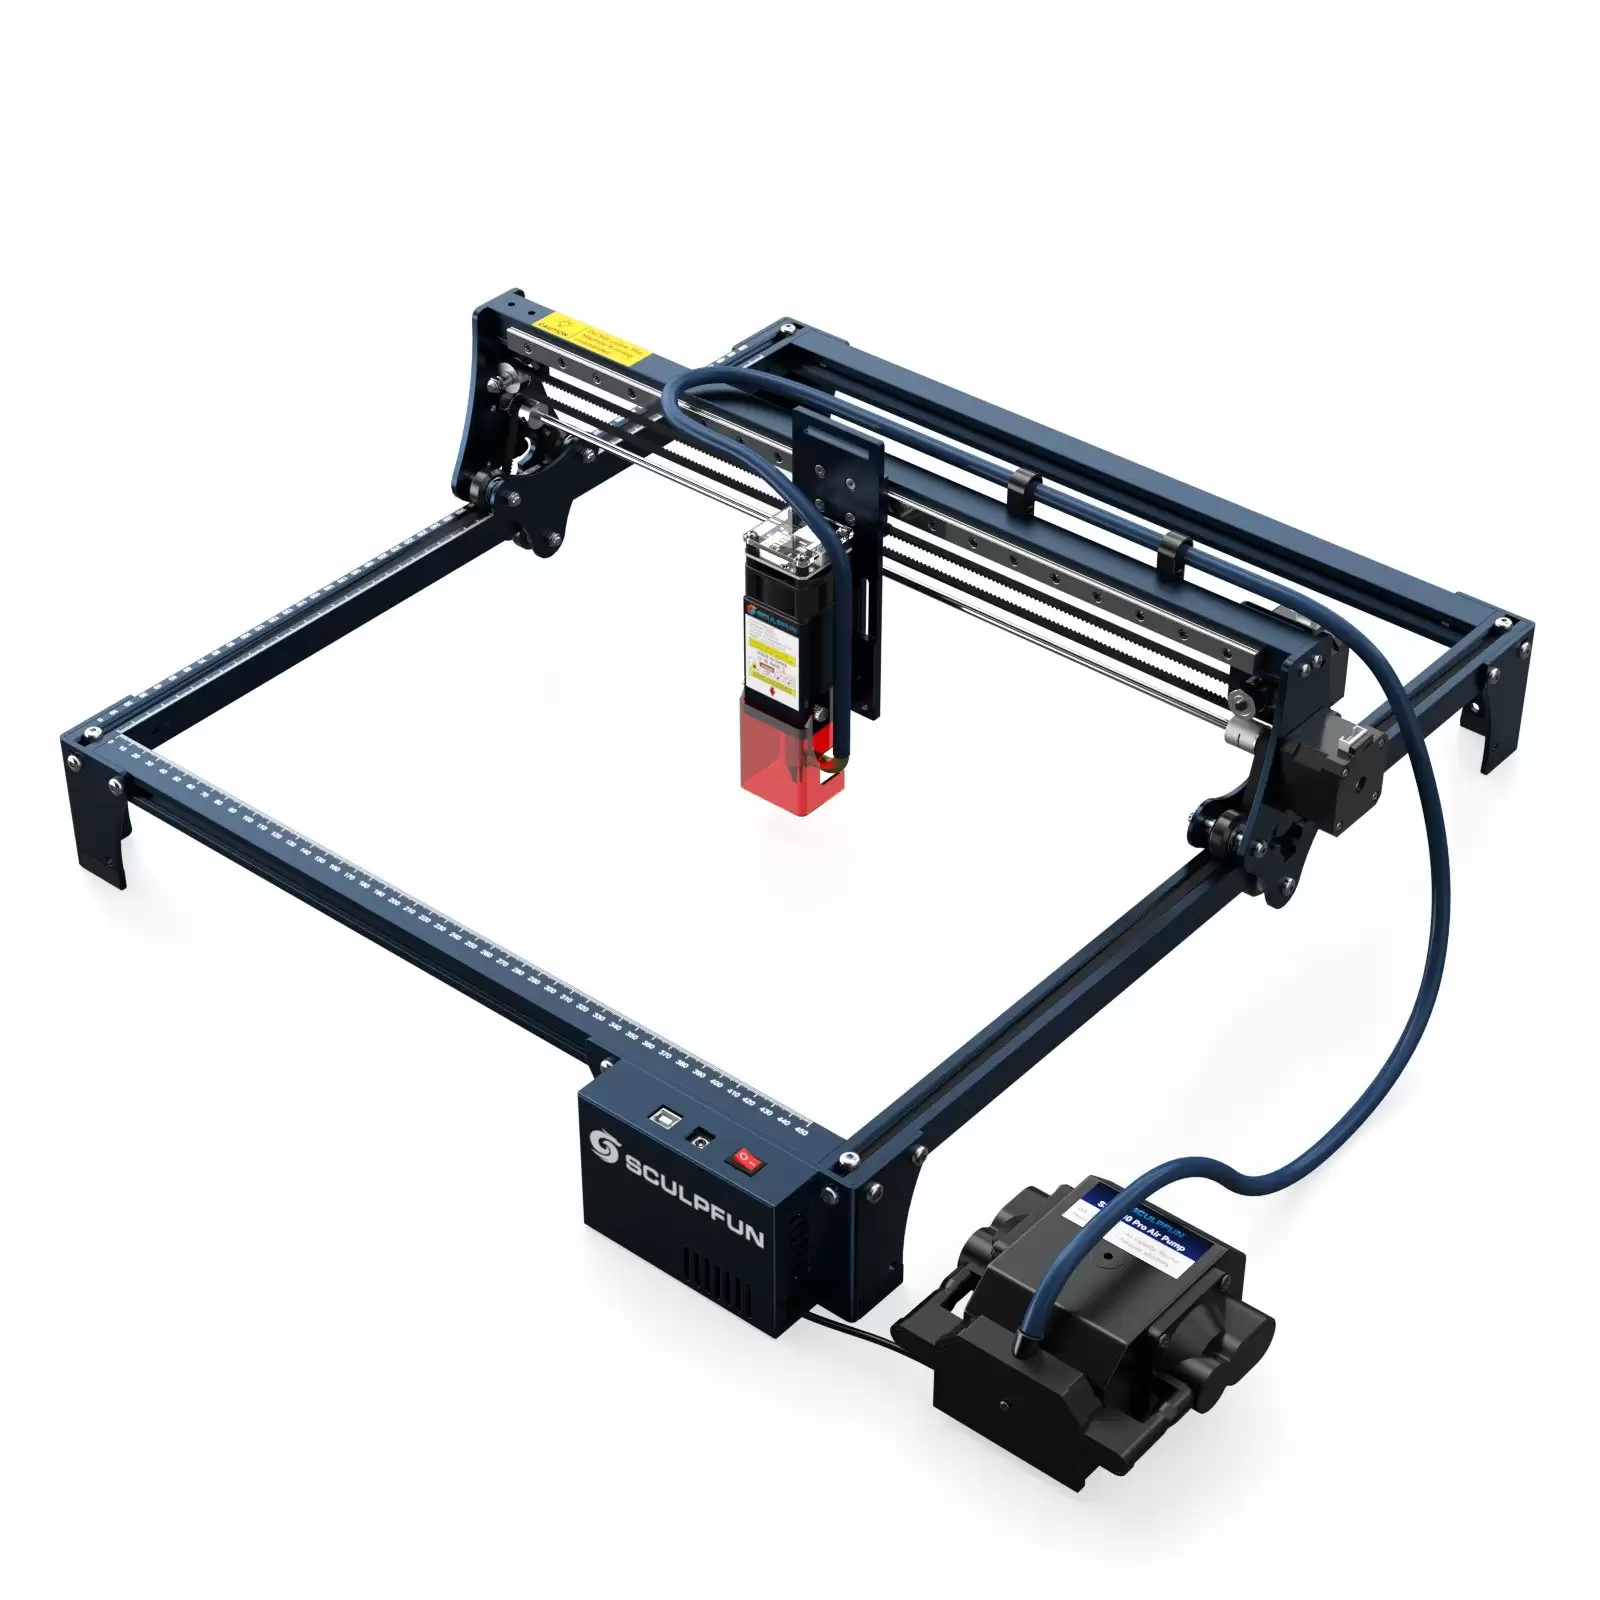 Order In Just $329 Sculpfun S30 Pro 10w Laser Engraver With Automatic Air-assist System Using This Tomtop Discount Code